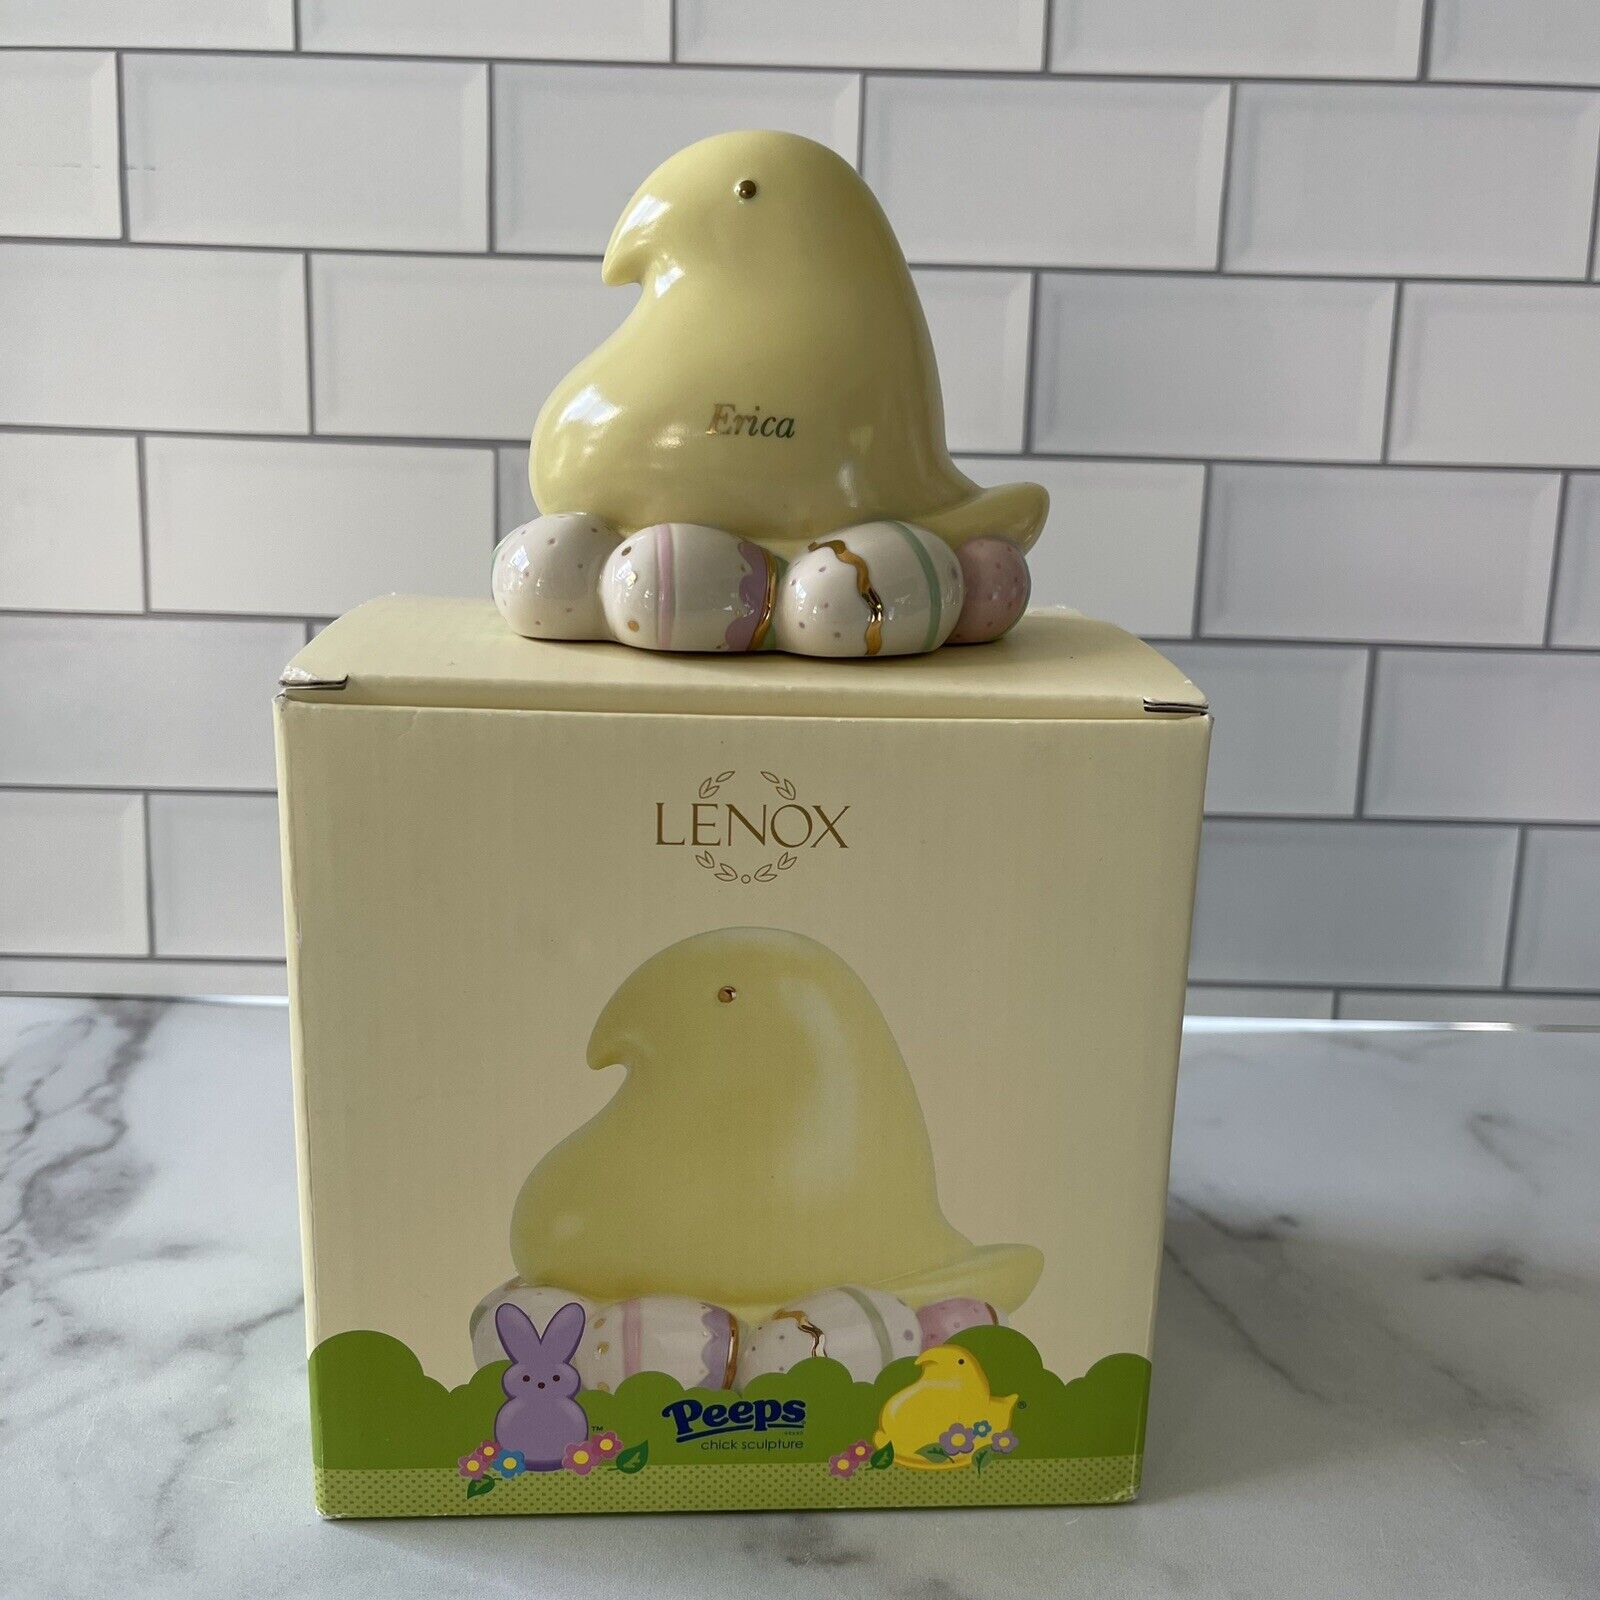 Lenox Peeps Easter Yellow Chick Figure Sculpture Personalized Erica